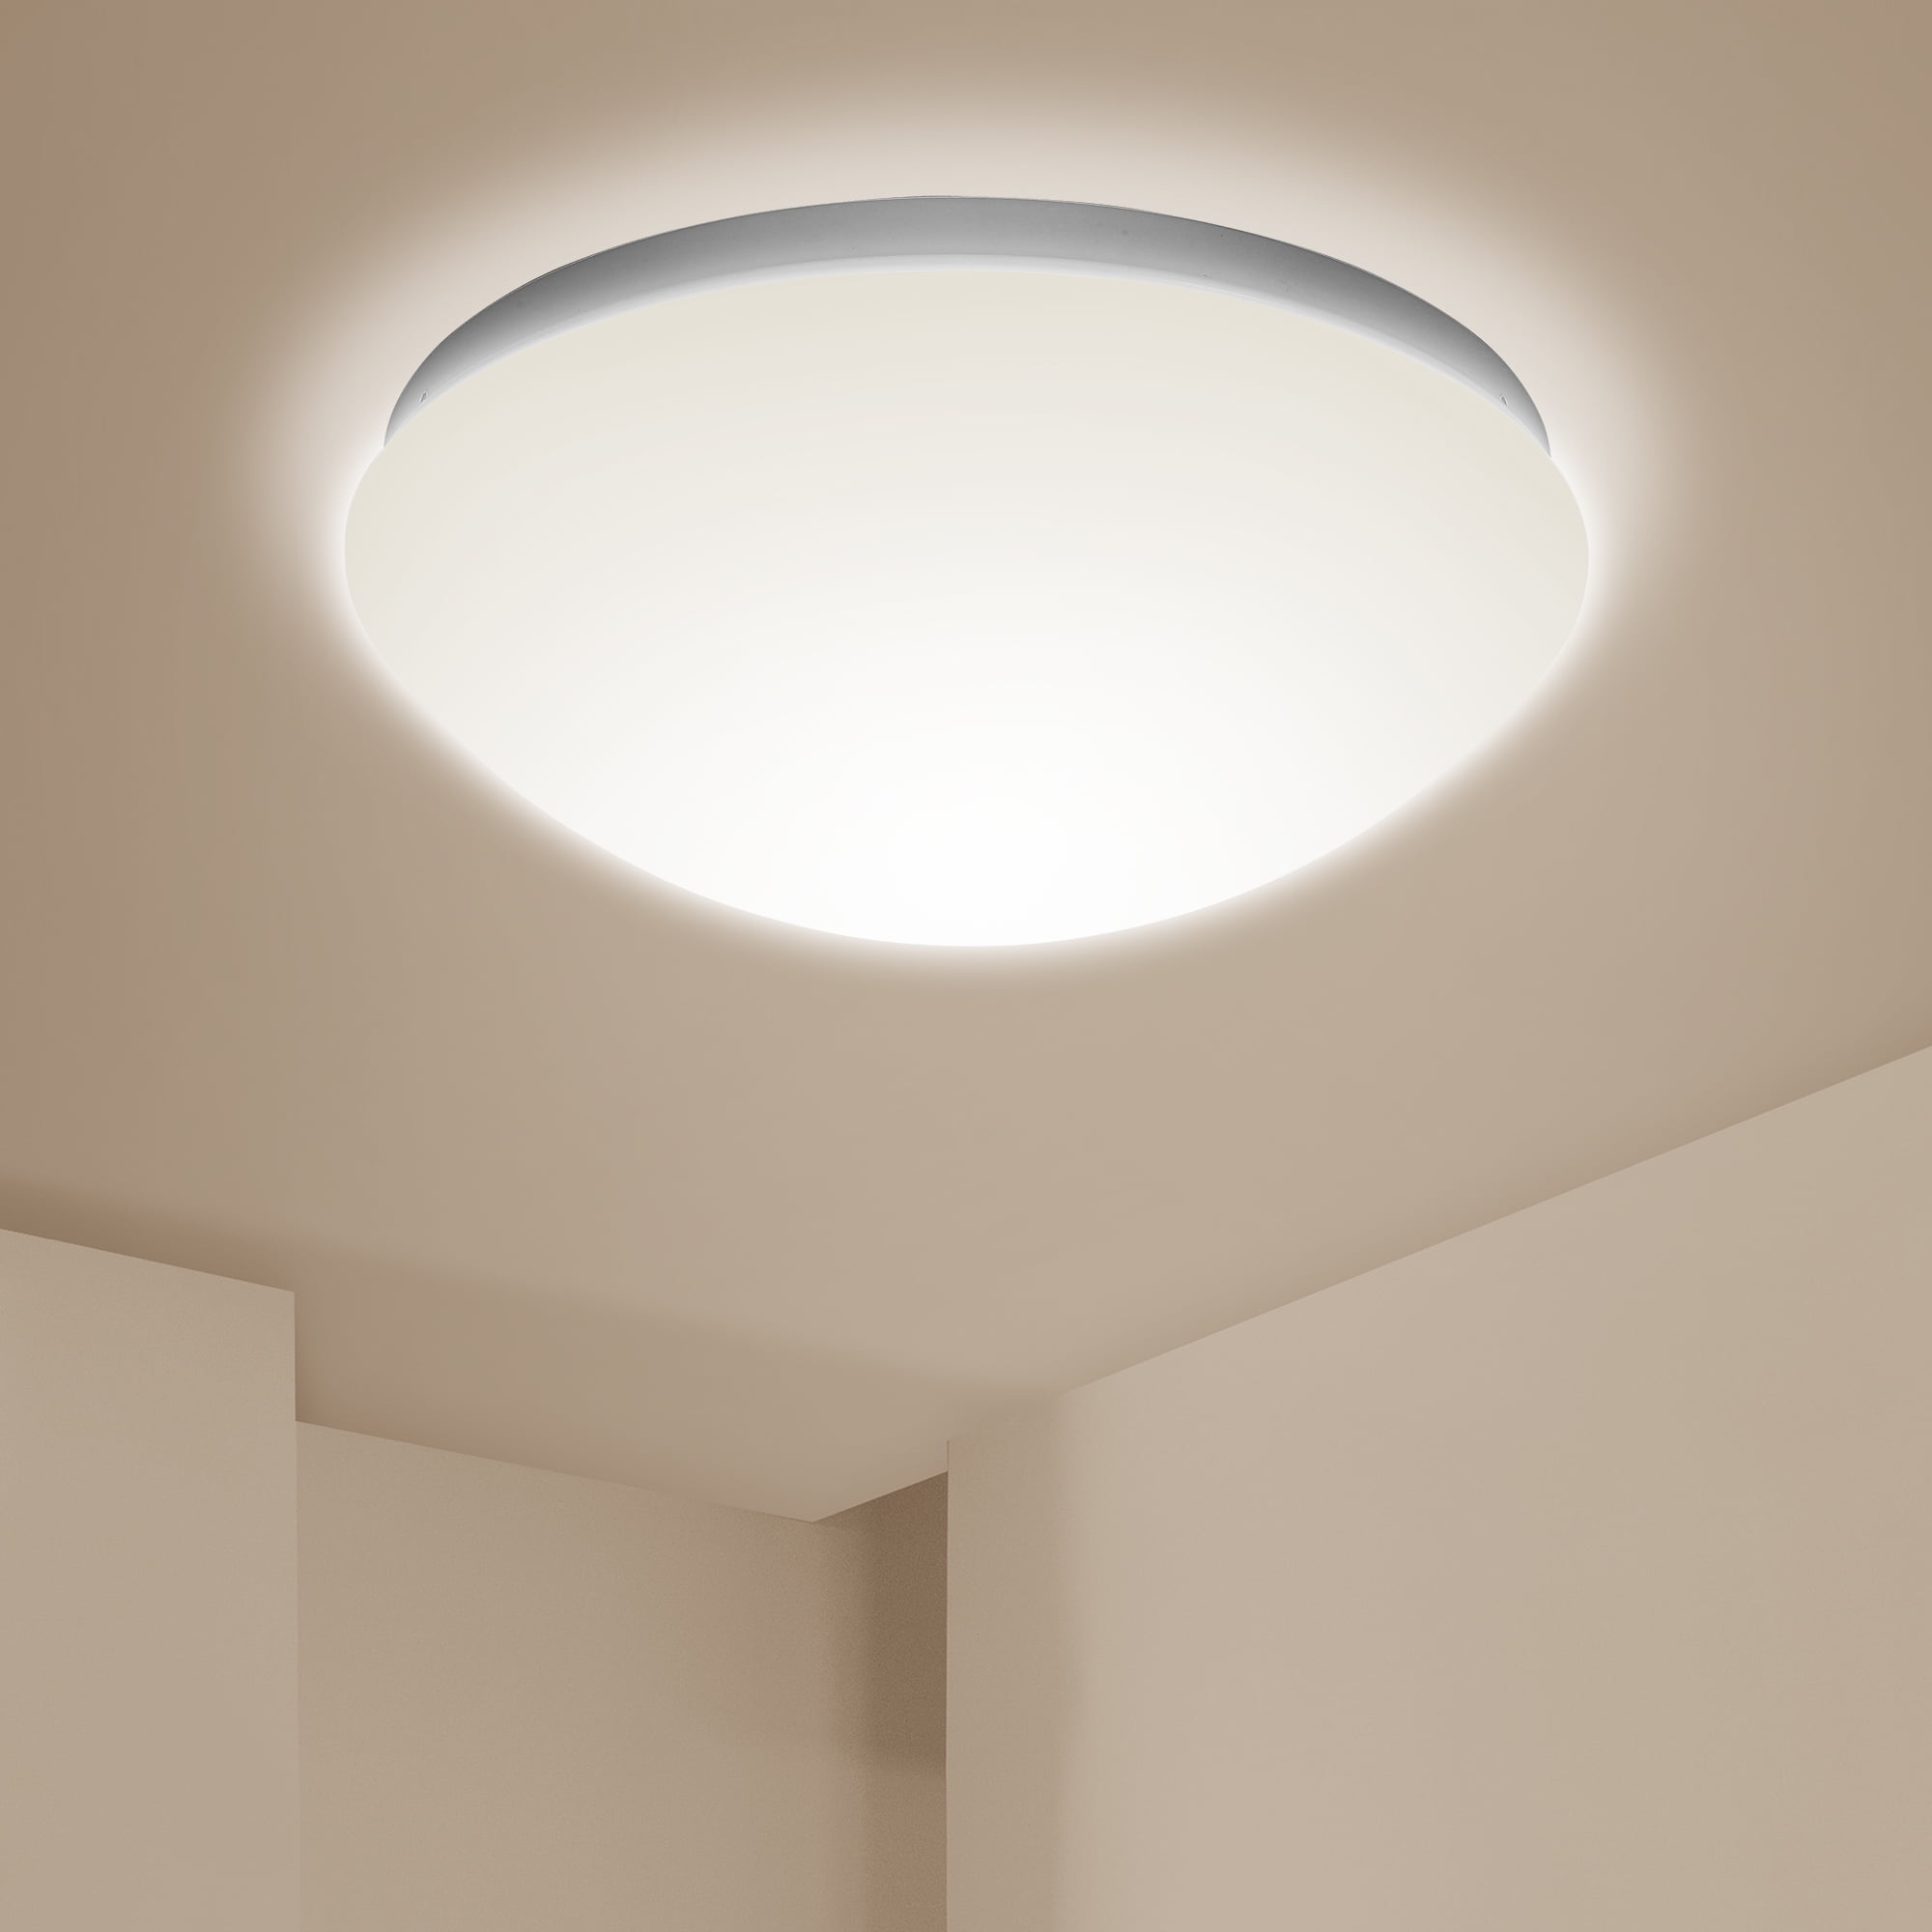 11 Inch LED Puff Round Ceiling Light Fixture - 20W - by Dependable